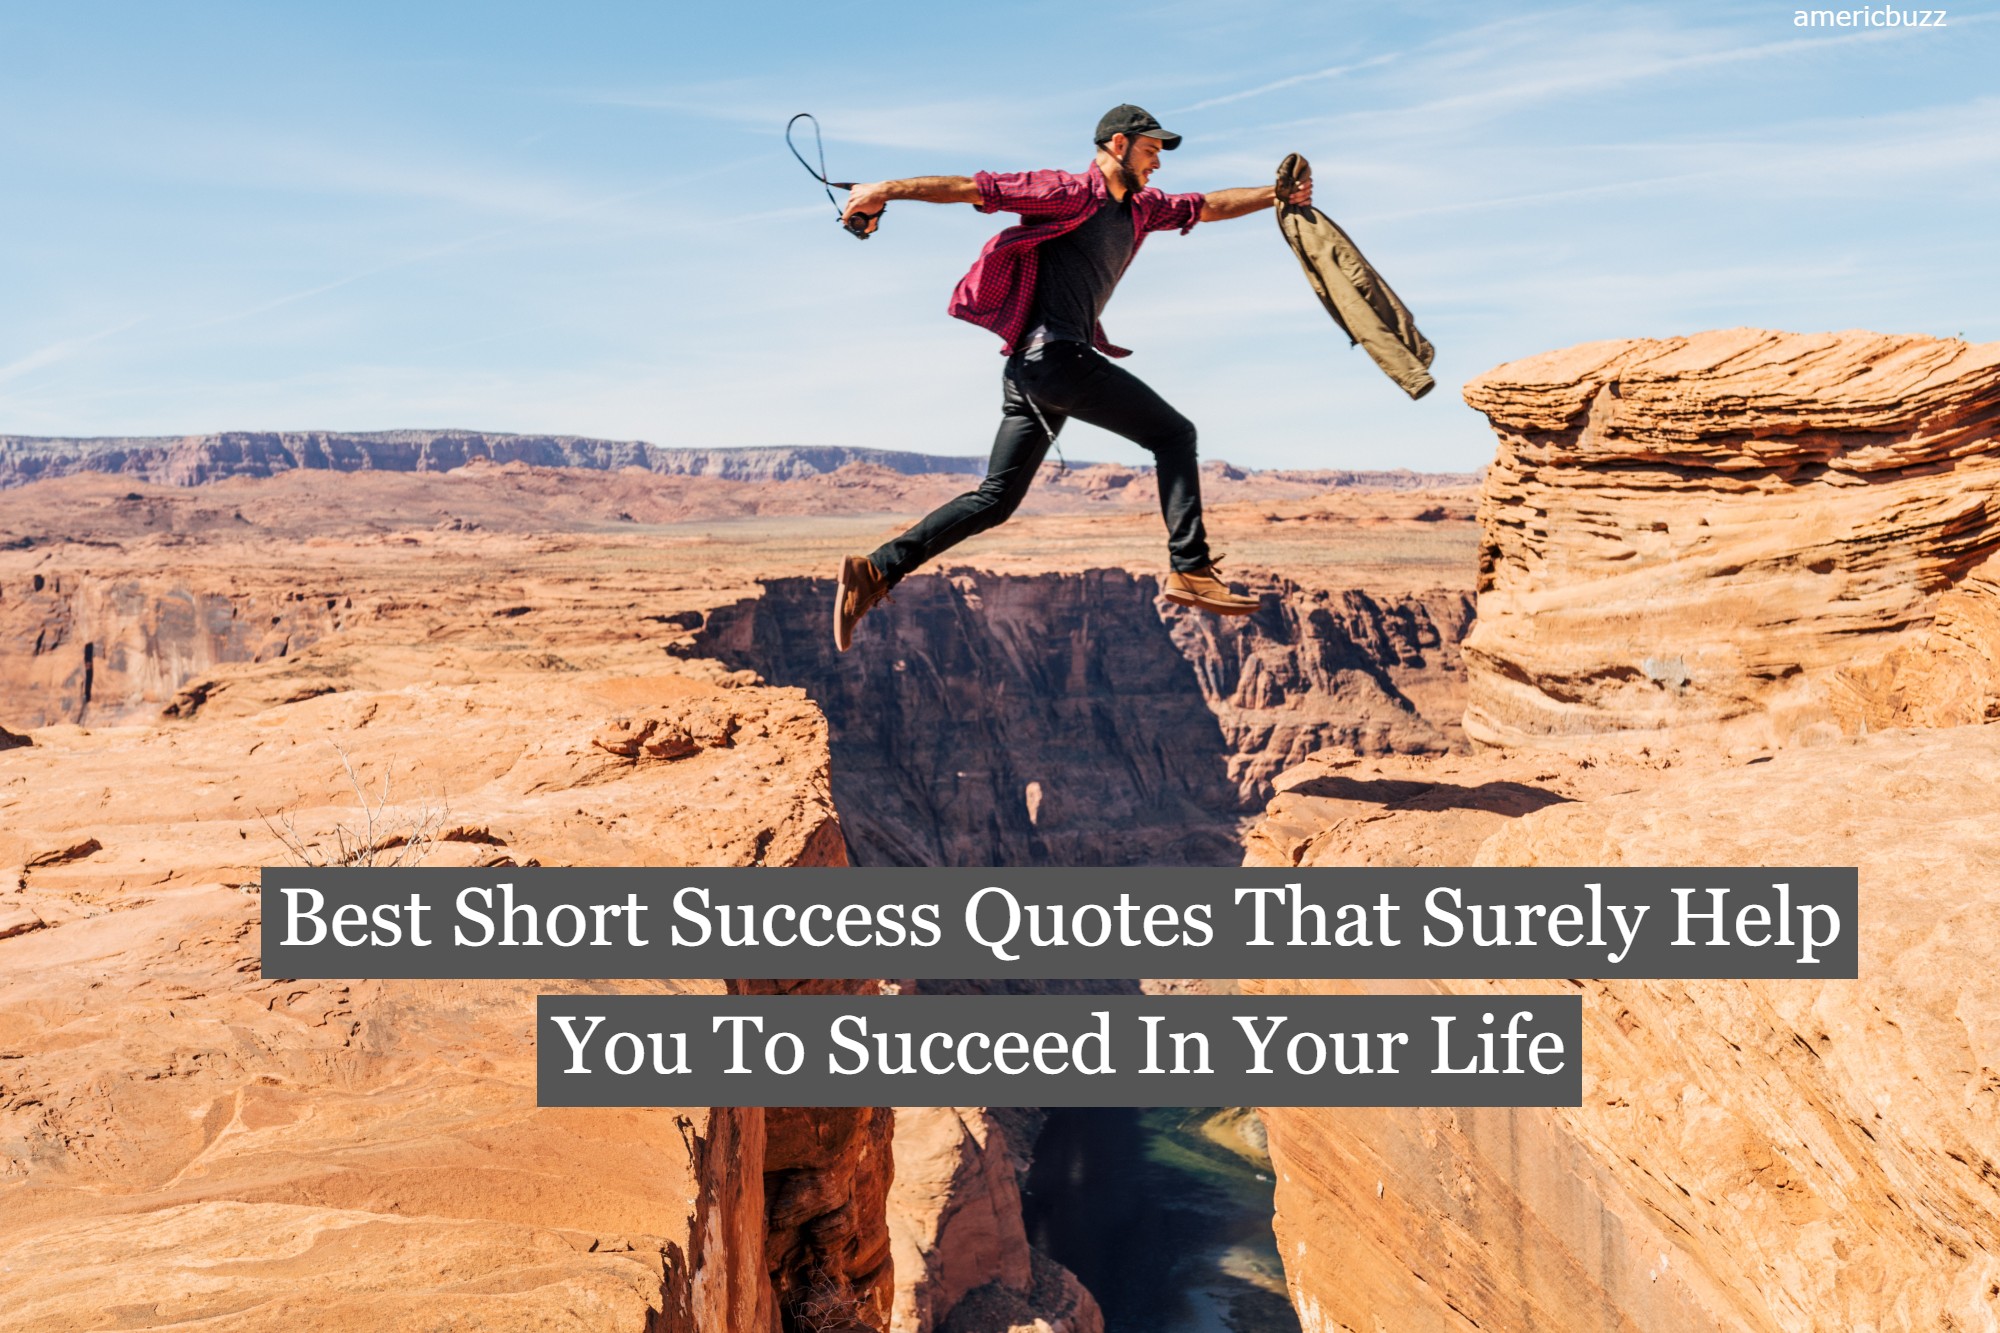 Best Short Success Quotes That Surely Help You To Succeed In Your Life